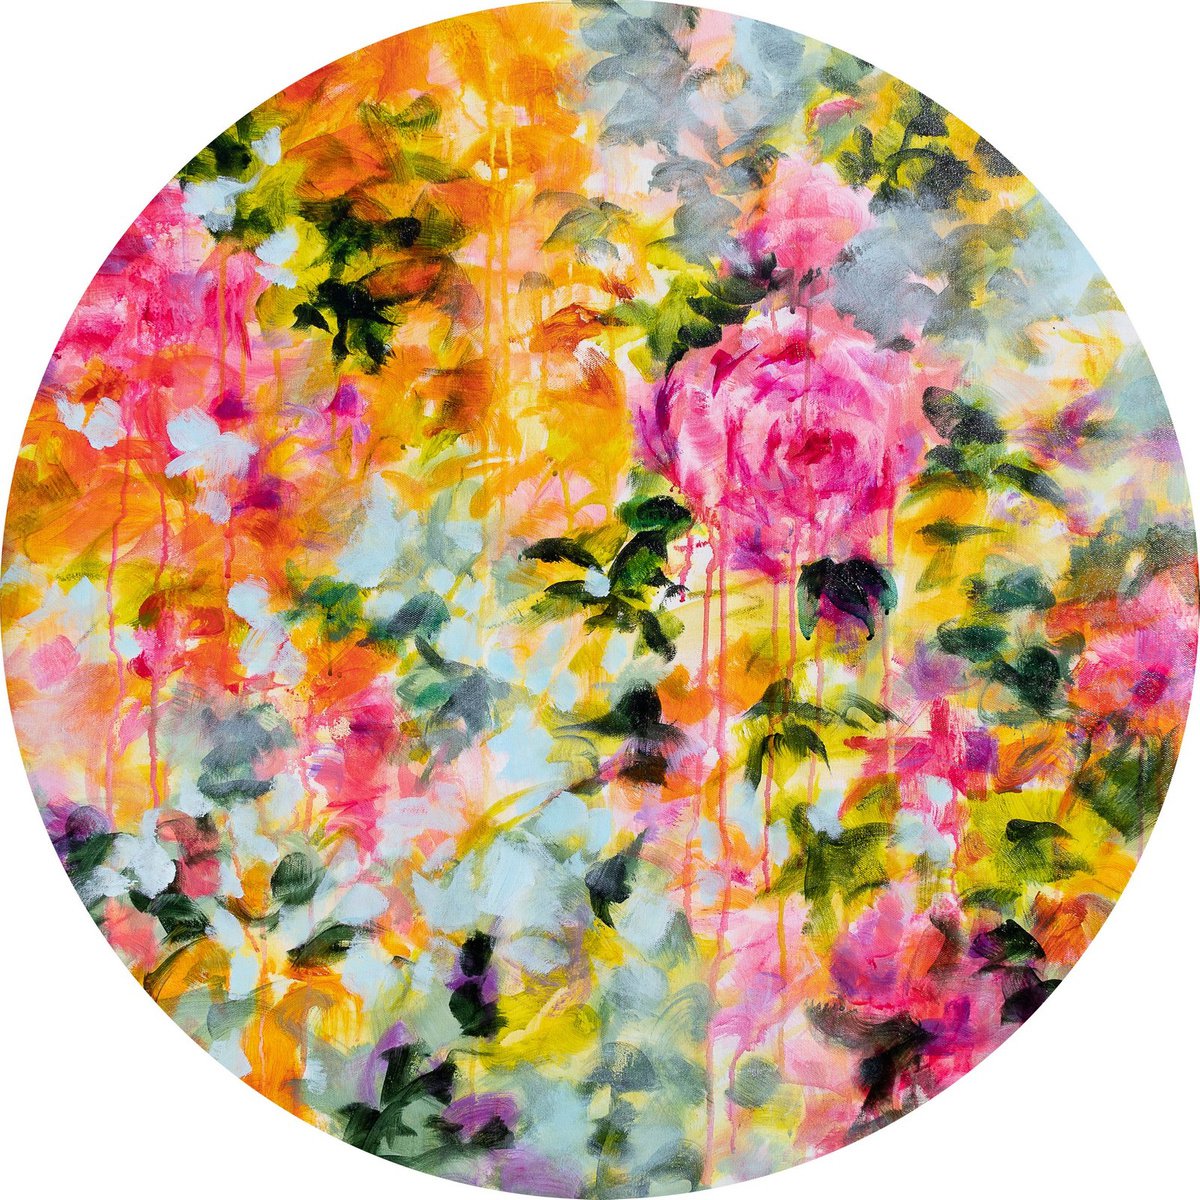 Psychedelic blue, pink, orange and yellow flowers tondo - Circular ...